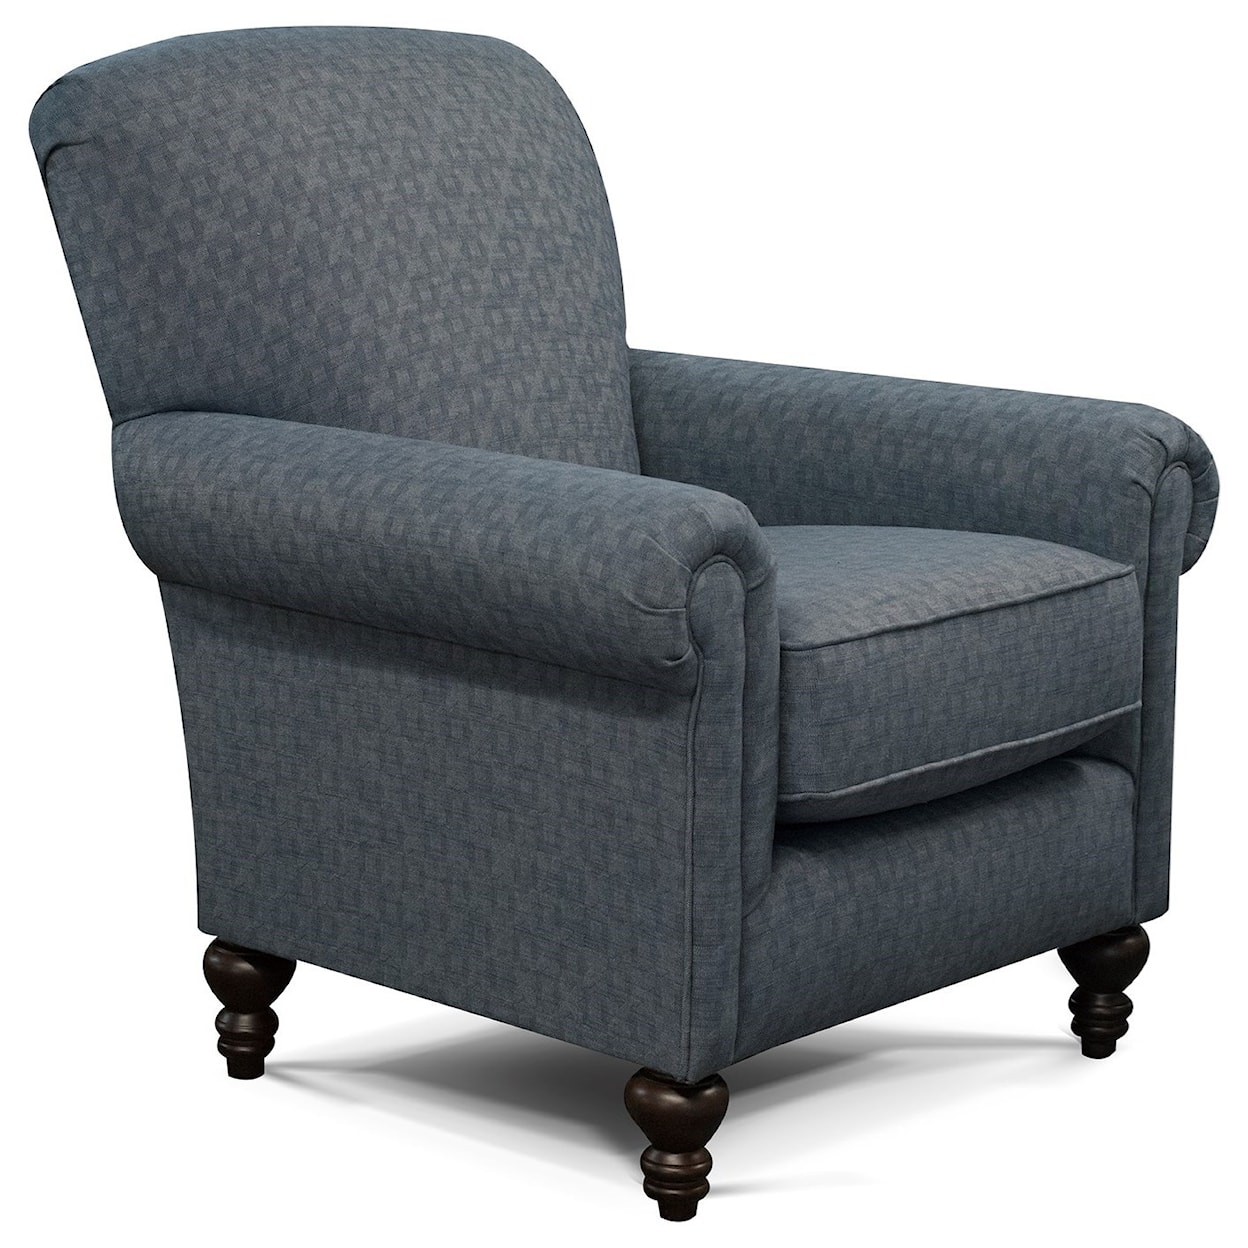 Tennessee Custom Upholstery 630 Series Upholstered Chair